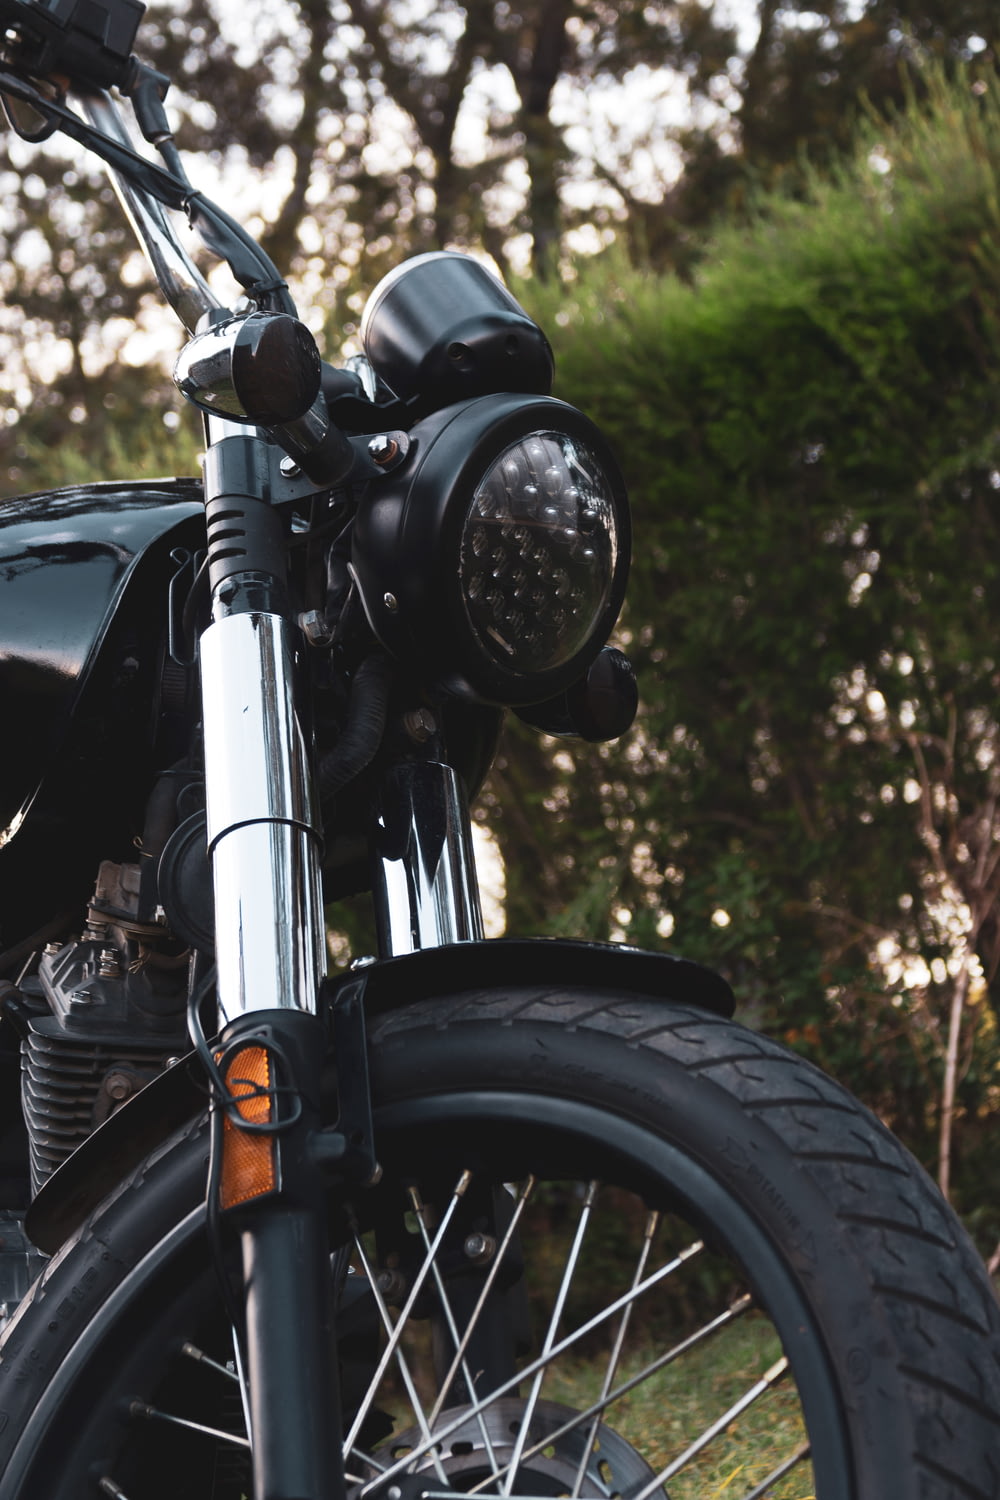 a close up of a motorcycle parked in a field